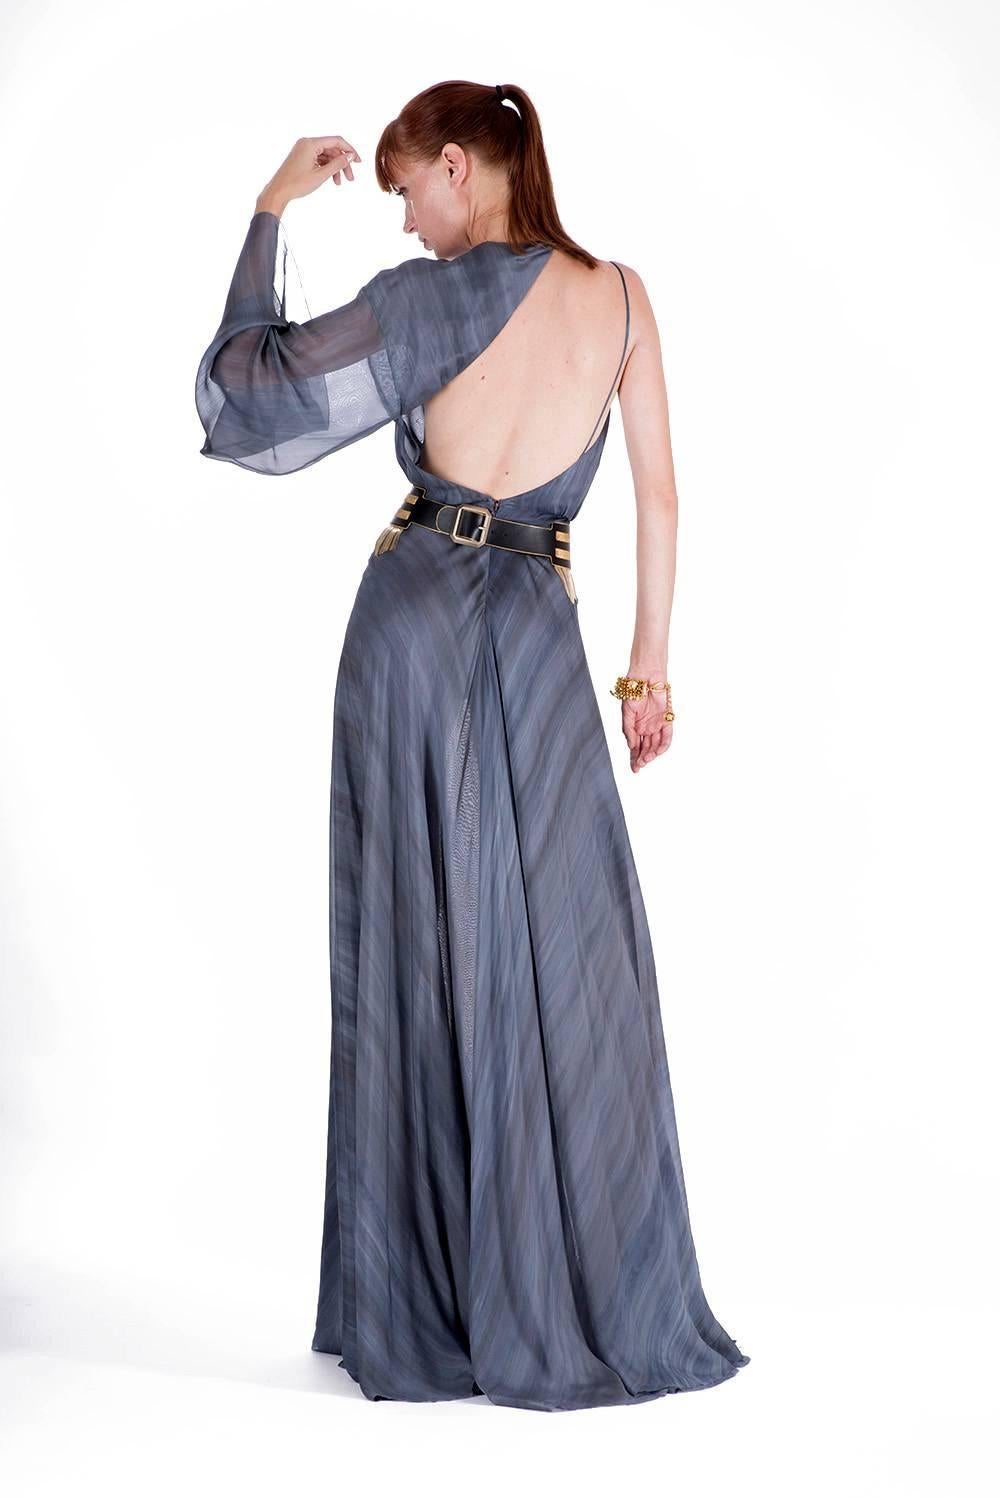 Women's S/S 2013 Look # 44 NEW VERSACE DOVE GREY LONG DRESS GOWN with ONE SLEEVE 38 - 2